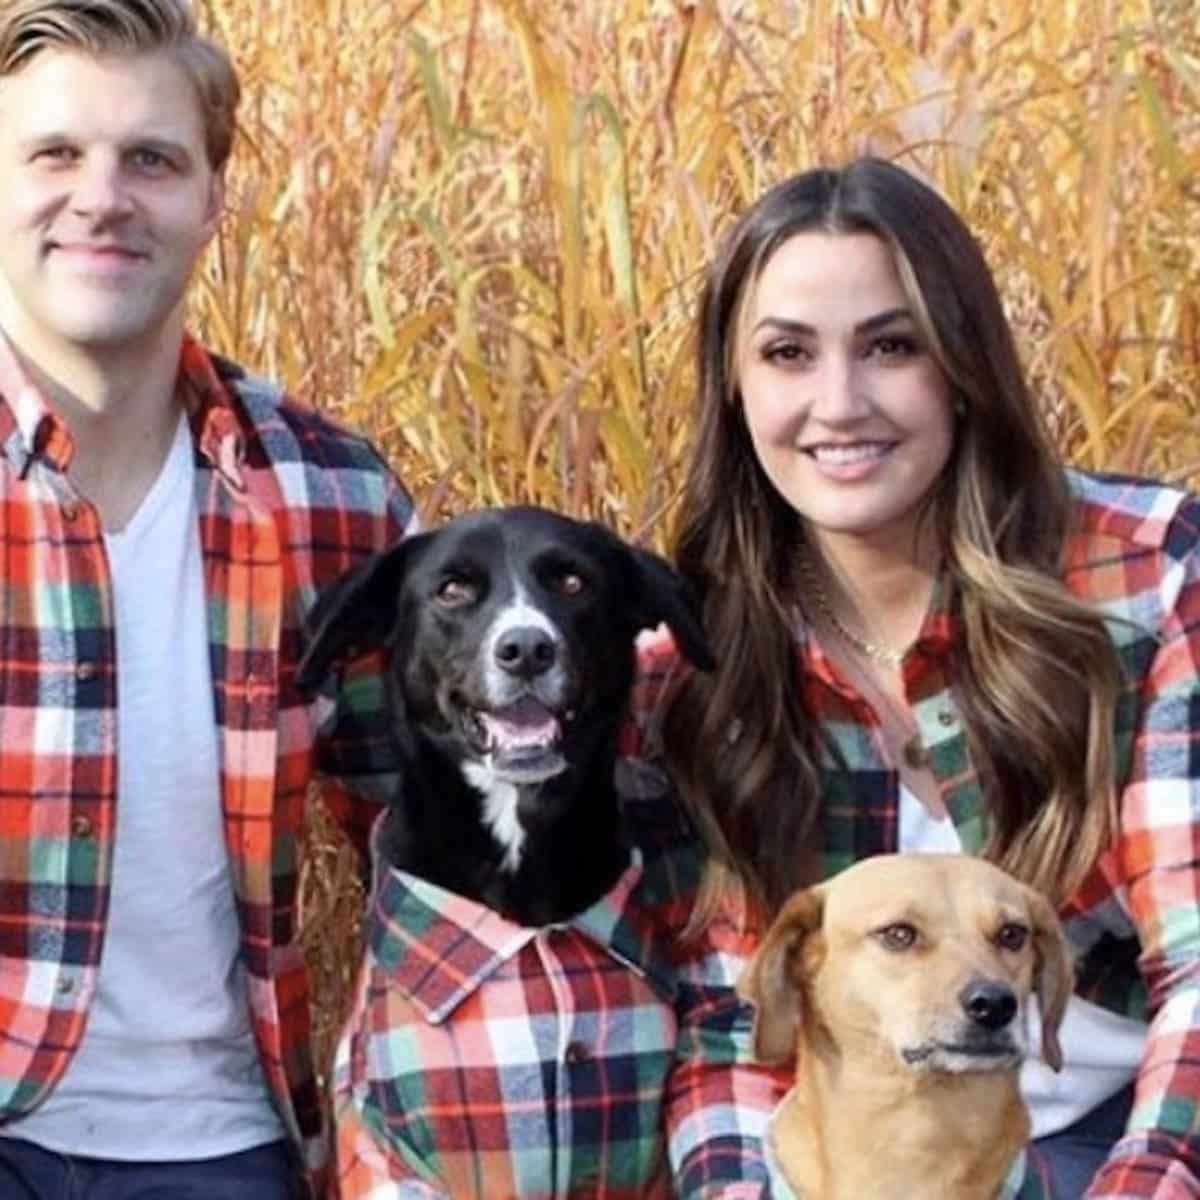 Dog Owners in matching outfits with their dogs